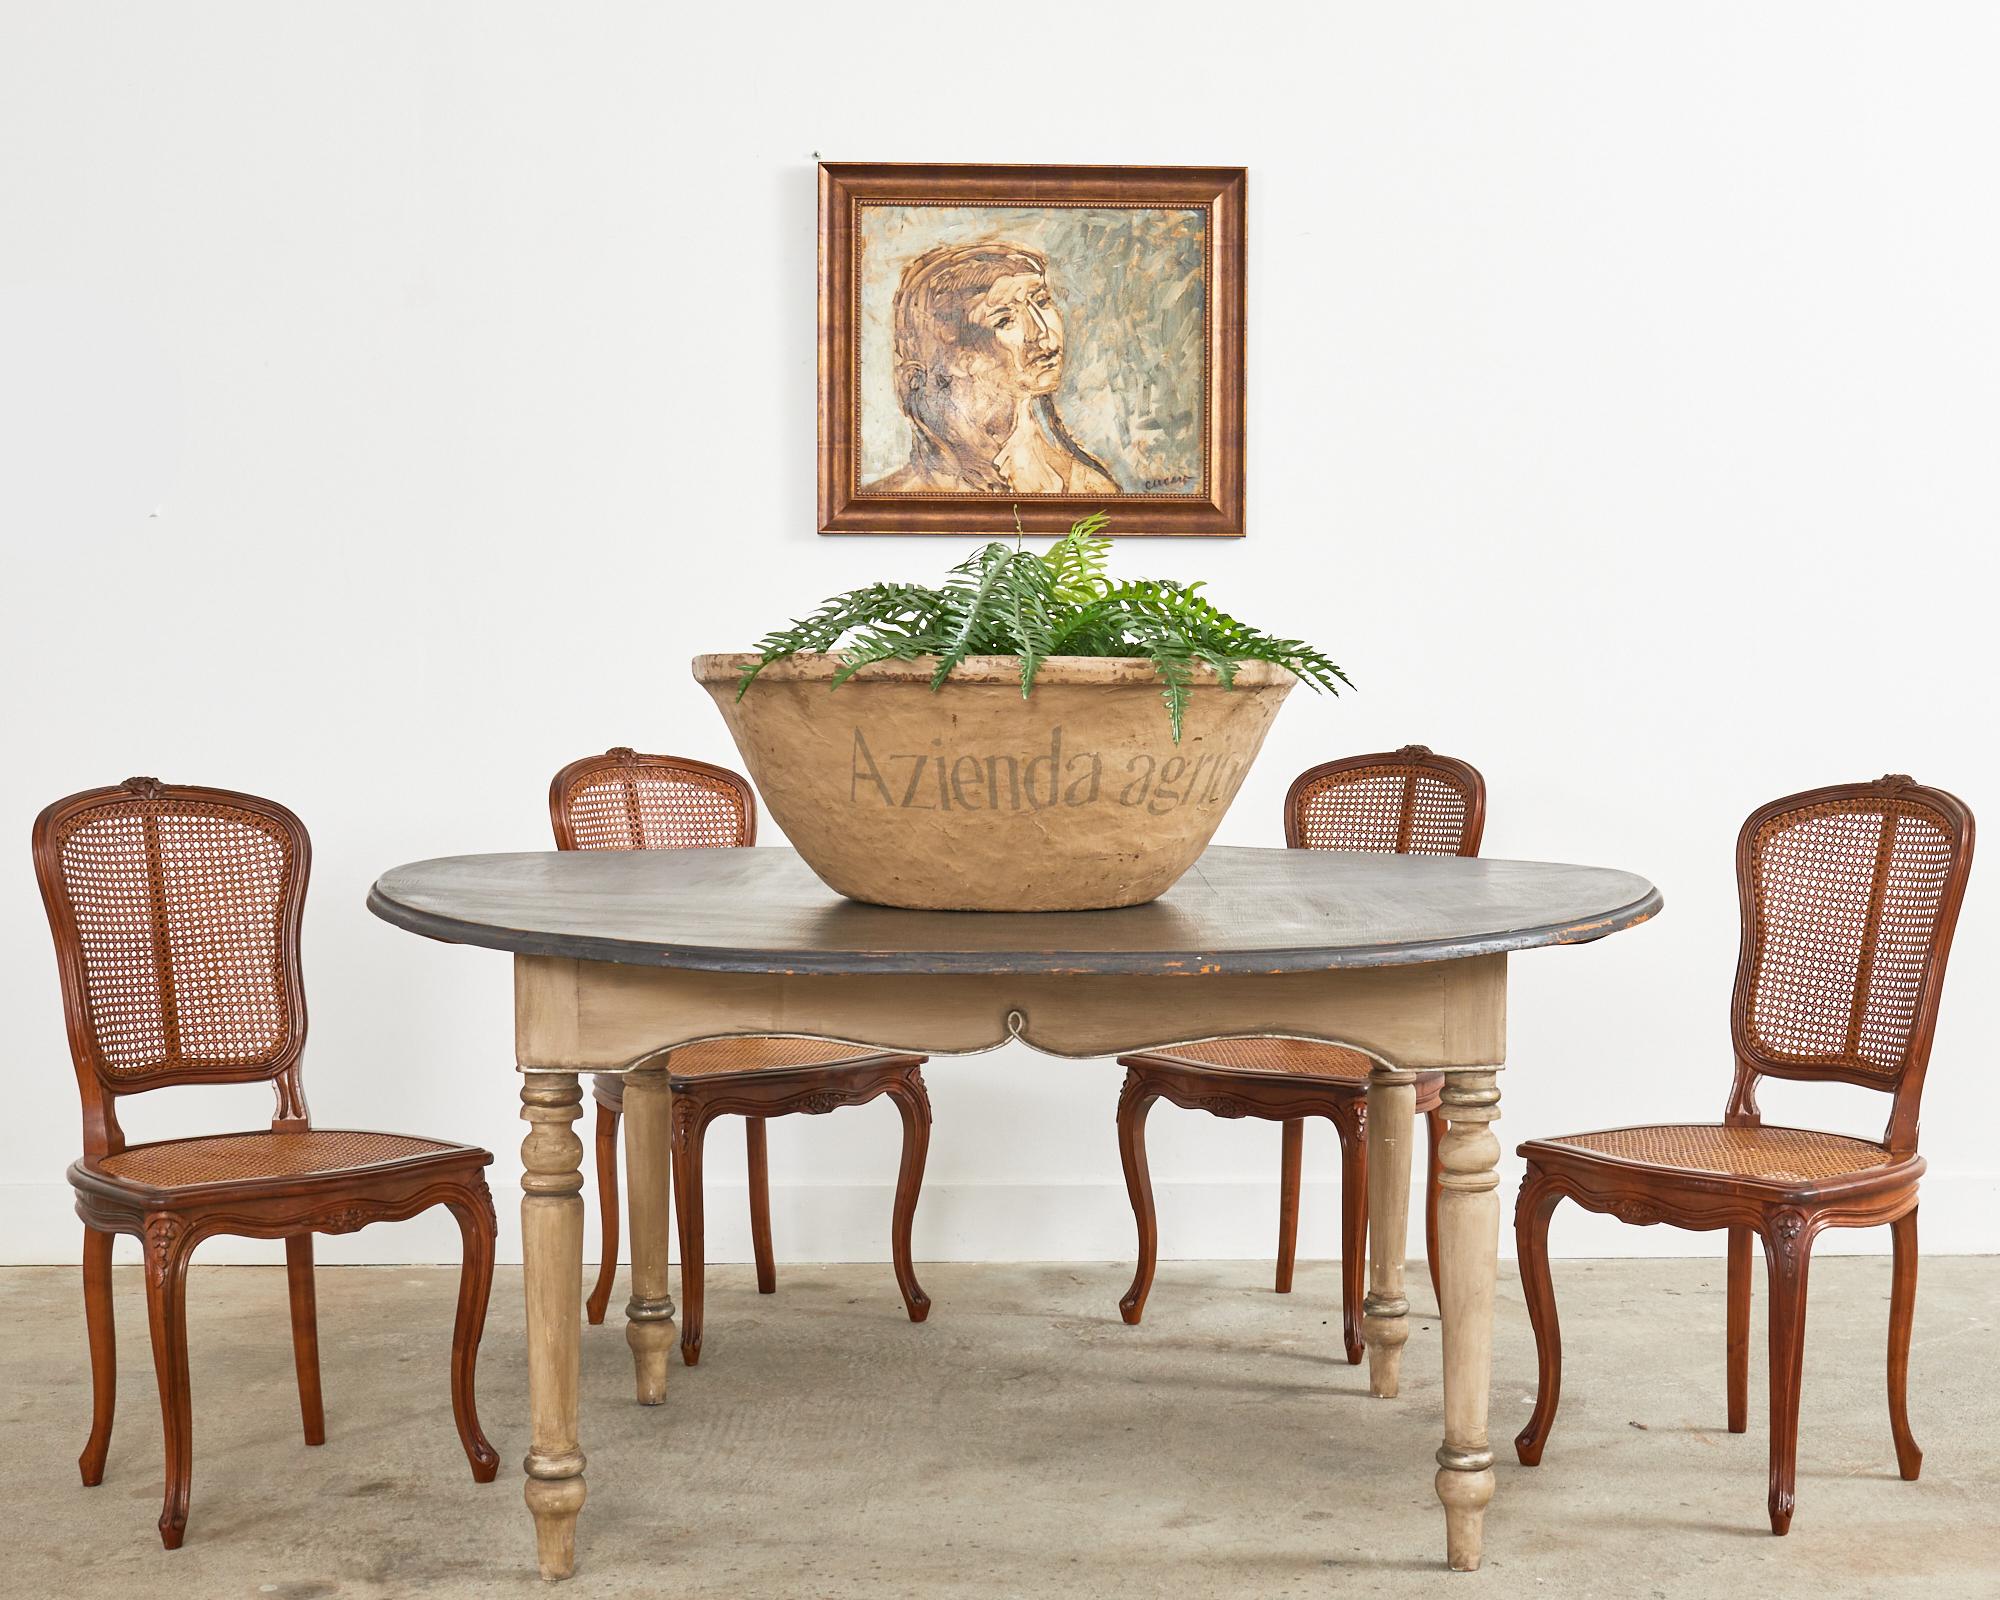 Rustic country french provincial round dining table painted by renowned Napa artist Ira Yeager (American 1938-2022) crafted from fruitwood. The table features an intentionally aged patina on the painted finish in a Swedish style with a grey base and